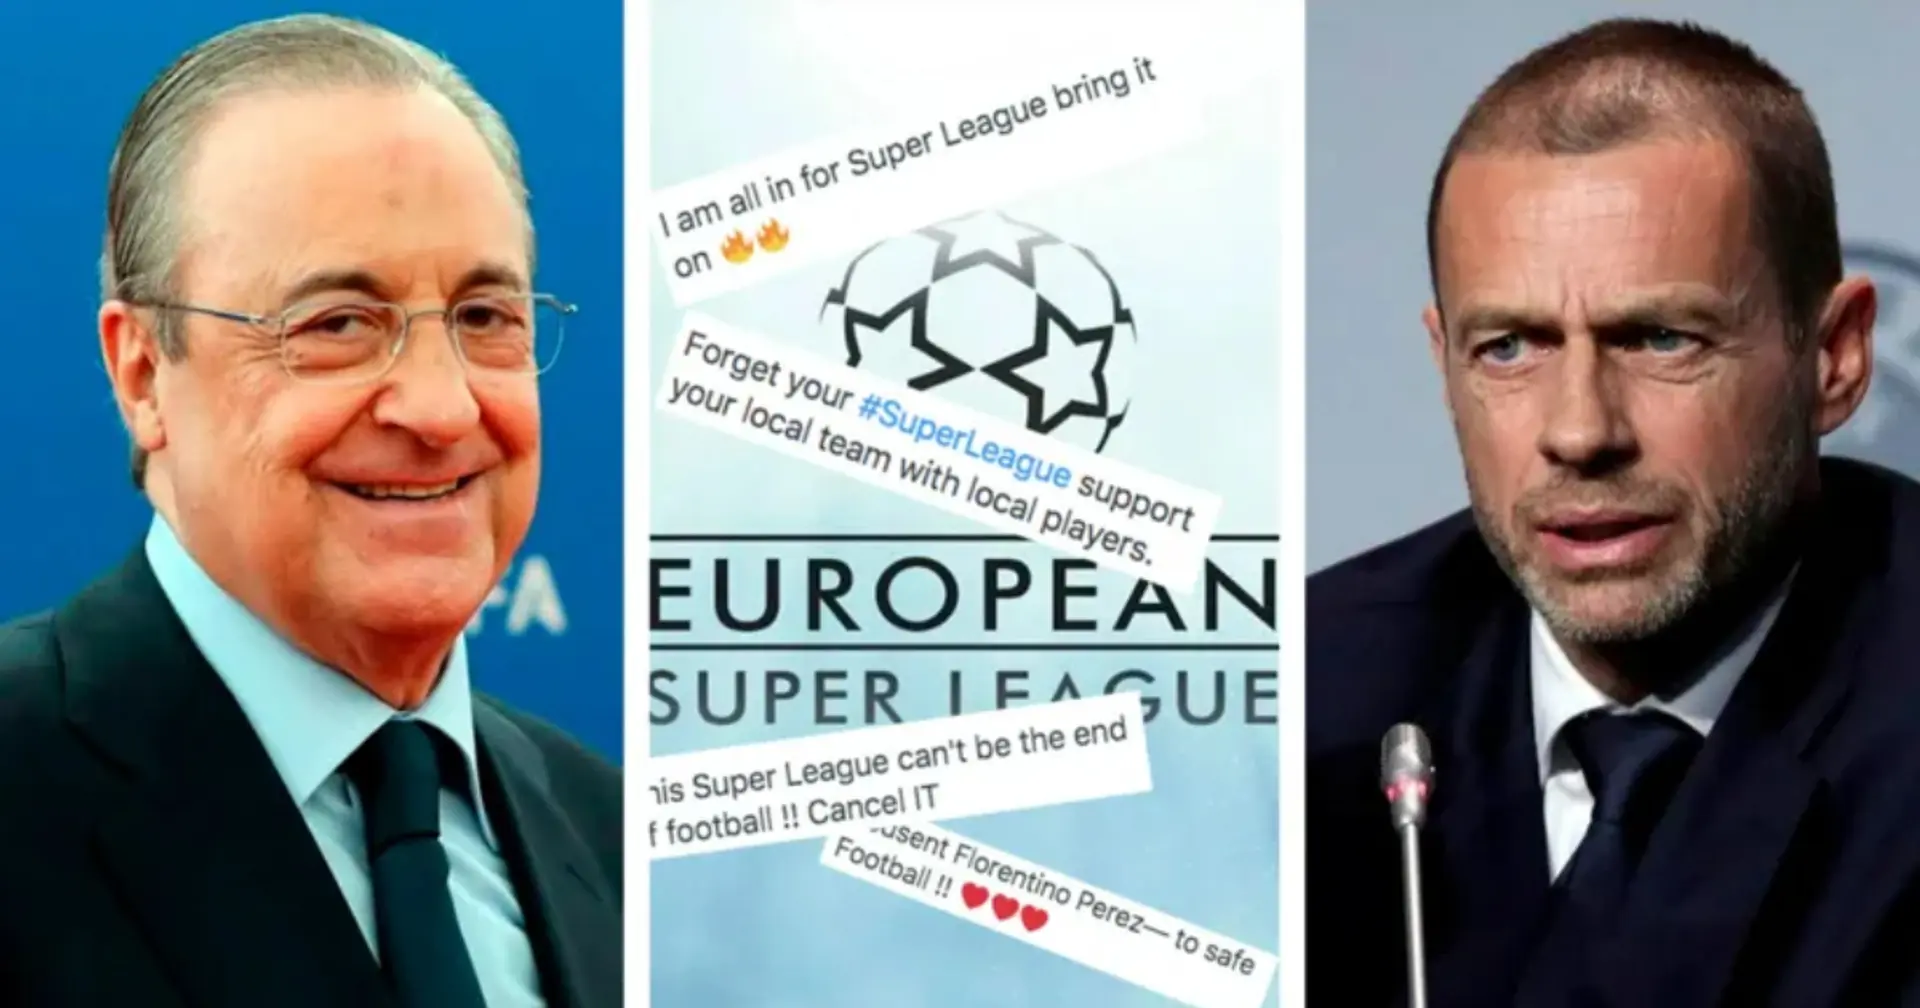 'Perez is Putin of football'; 'A getaway from little teams who play anti-football': Global fan community reacts to Super League formation